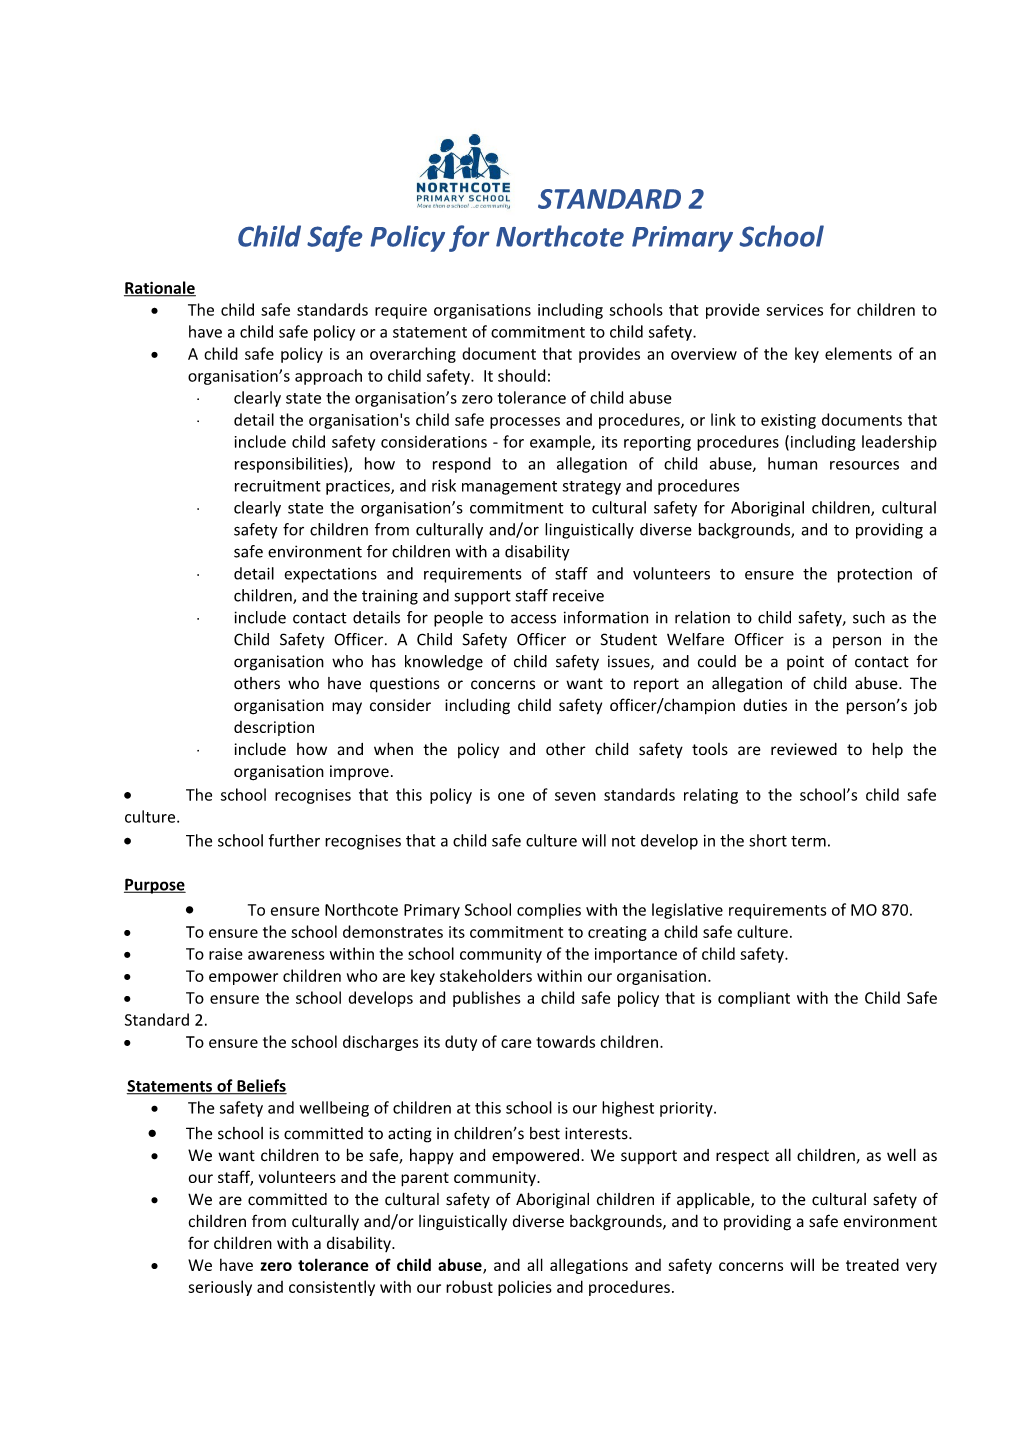 Child Safe Policy for Northcote Primary School